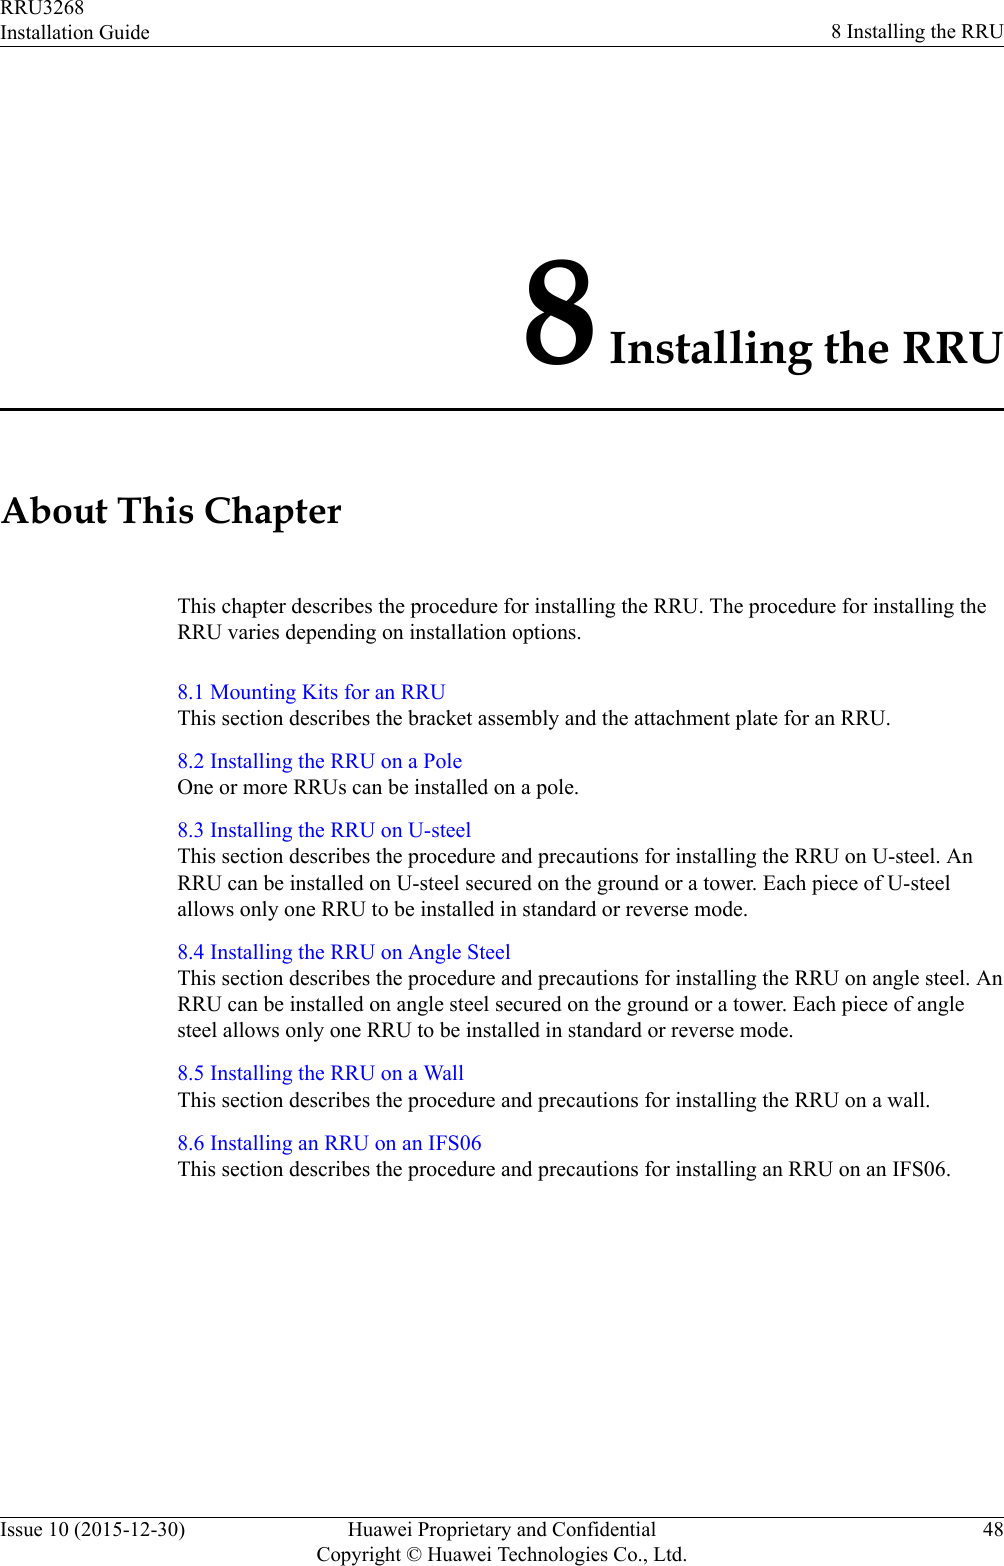 8 Installing the RRUAbout This ChapterThis chapter describes the procedure for installing the RRU. The procedure for installing theRRU varies depending on installation options.8.1 Mounting Kits for an RRUThis section describes the bracket assembly and the attachment plate for an RRU.8.2 Installing the RRU on a PoleOne or more RRUs can be installed on a pole.8.3 Installing the RRU on U-steelThis section describes the procedure and precautions for installing the RRU on U-steel. AnRRU can be installed on U-steel secured on the ground or a tower. Each piece of U-steelallows only one RRU to be installed in standard or reverse mode.8.4 Installing the RRU on Angle SteelThis section describes the procedure and precautions for installing the RRU on angle steel. AnRRU can be installed on angle steel secured on the ground or a tower. Each piece of anglesteel allows only one RRU to be installed in standard or reverse mode.8.5 Installing the RRU on a WallThis section describes the procedure and precautions for installing the RRU on a wall.8.6 Installing an RRU on an IFS06This section describes the procedure and precautions for installing an RRU on an IFS06.RRU3268Installation Guide 8 Installing the RRUIssue 10 (2015-12-30) Huawei Proprietary and ConfidentialCopyright © Huawei Technologies Co., Ltd.48